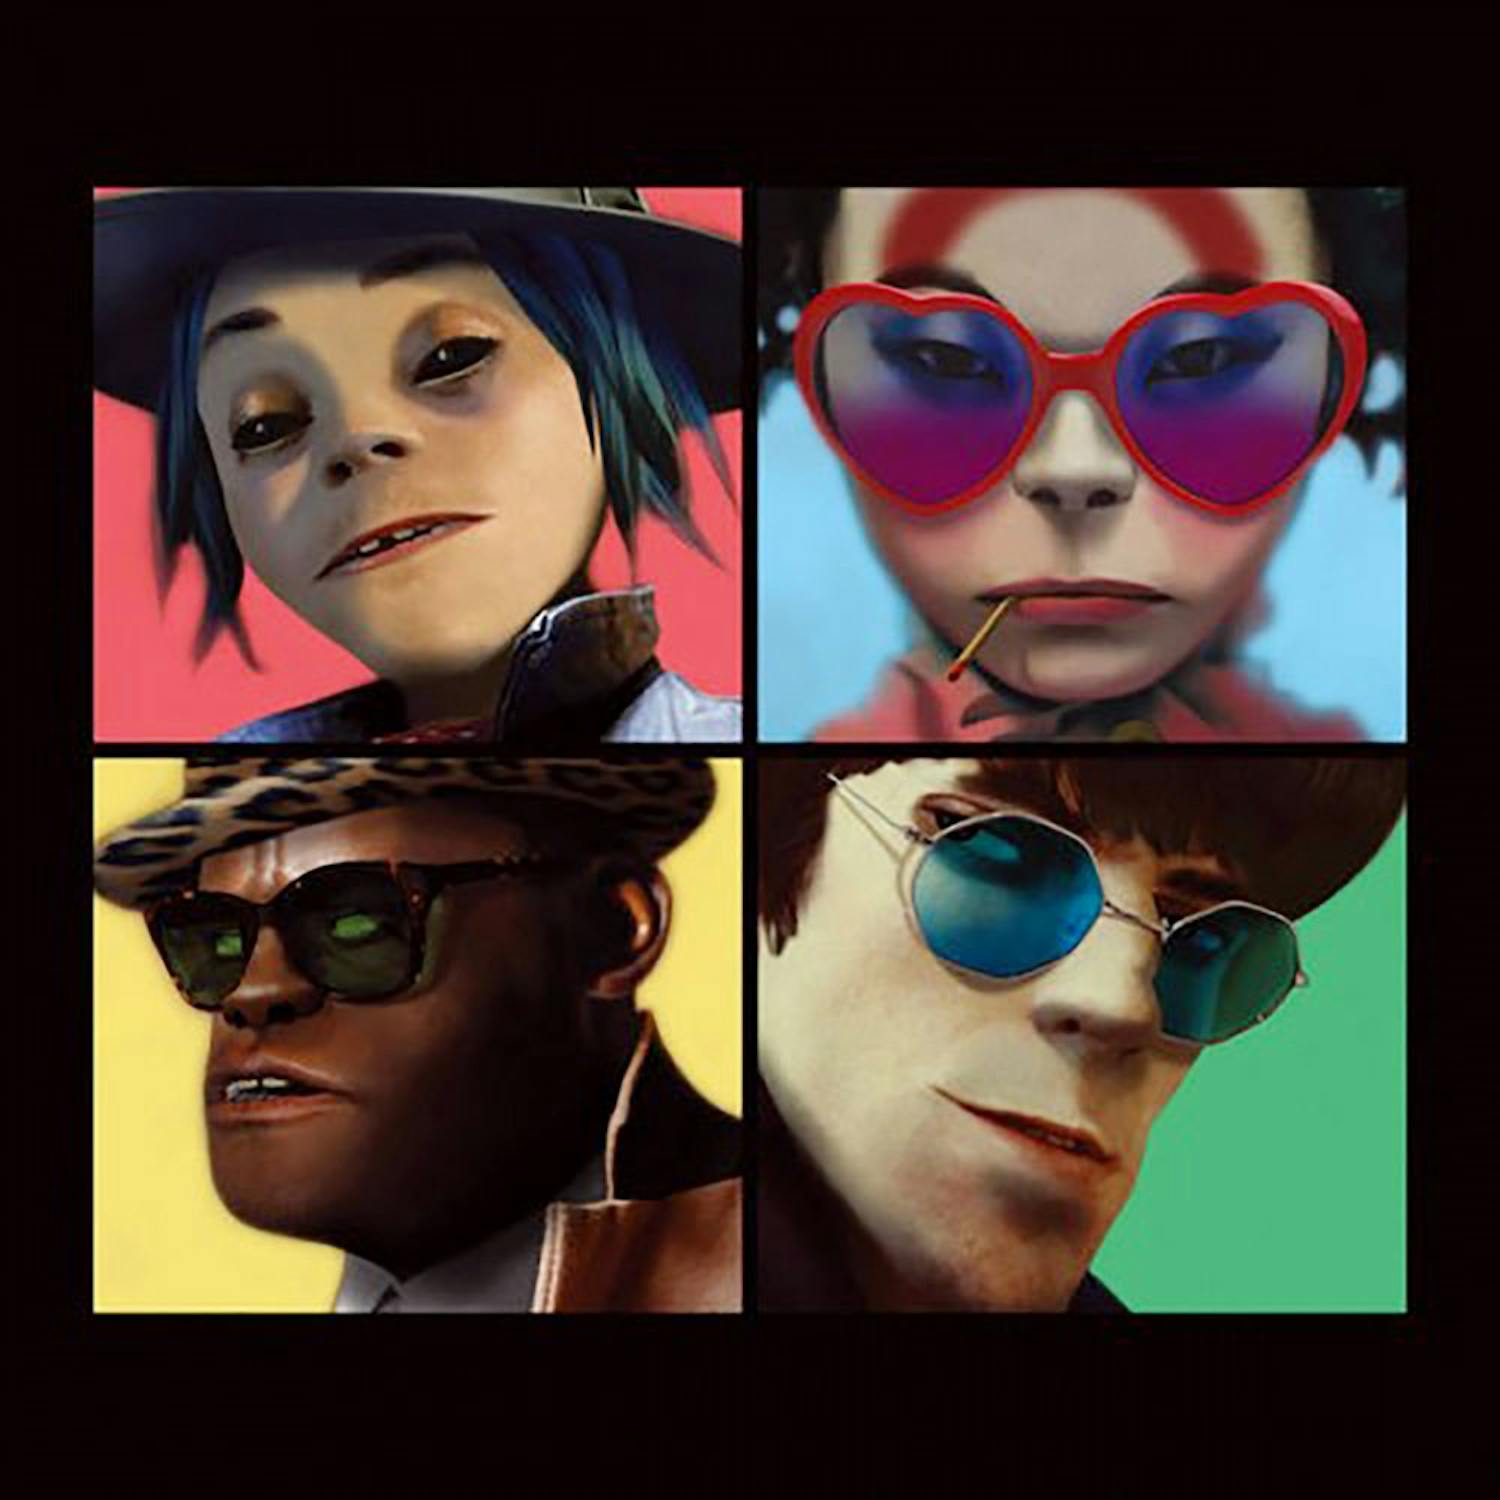 The Gorillaz’ fifth studio album, Humanz, released on April 28. The song features artists including D.R.A.M., Vince Staples and Popcaan.